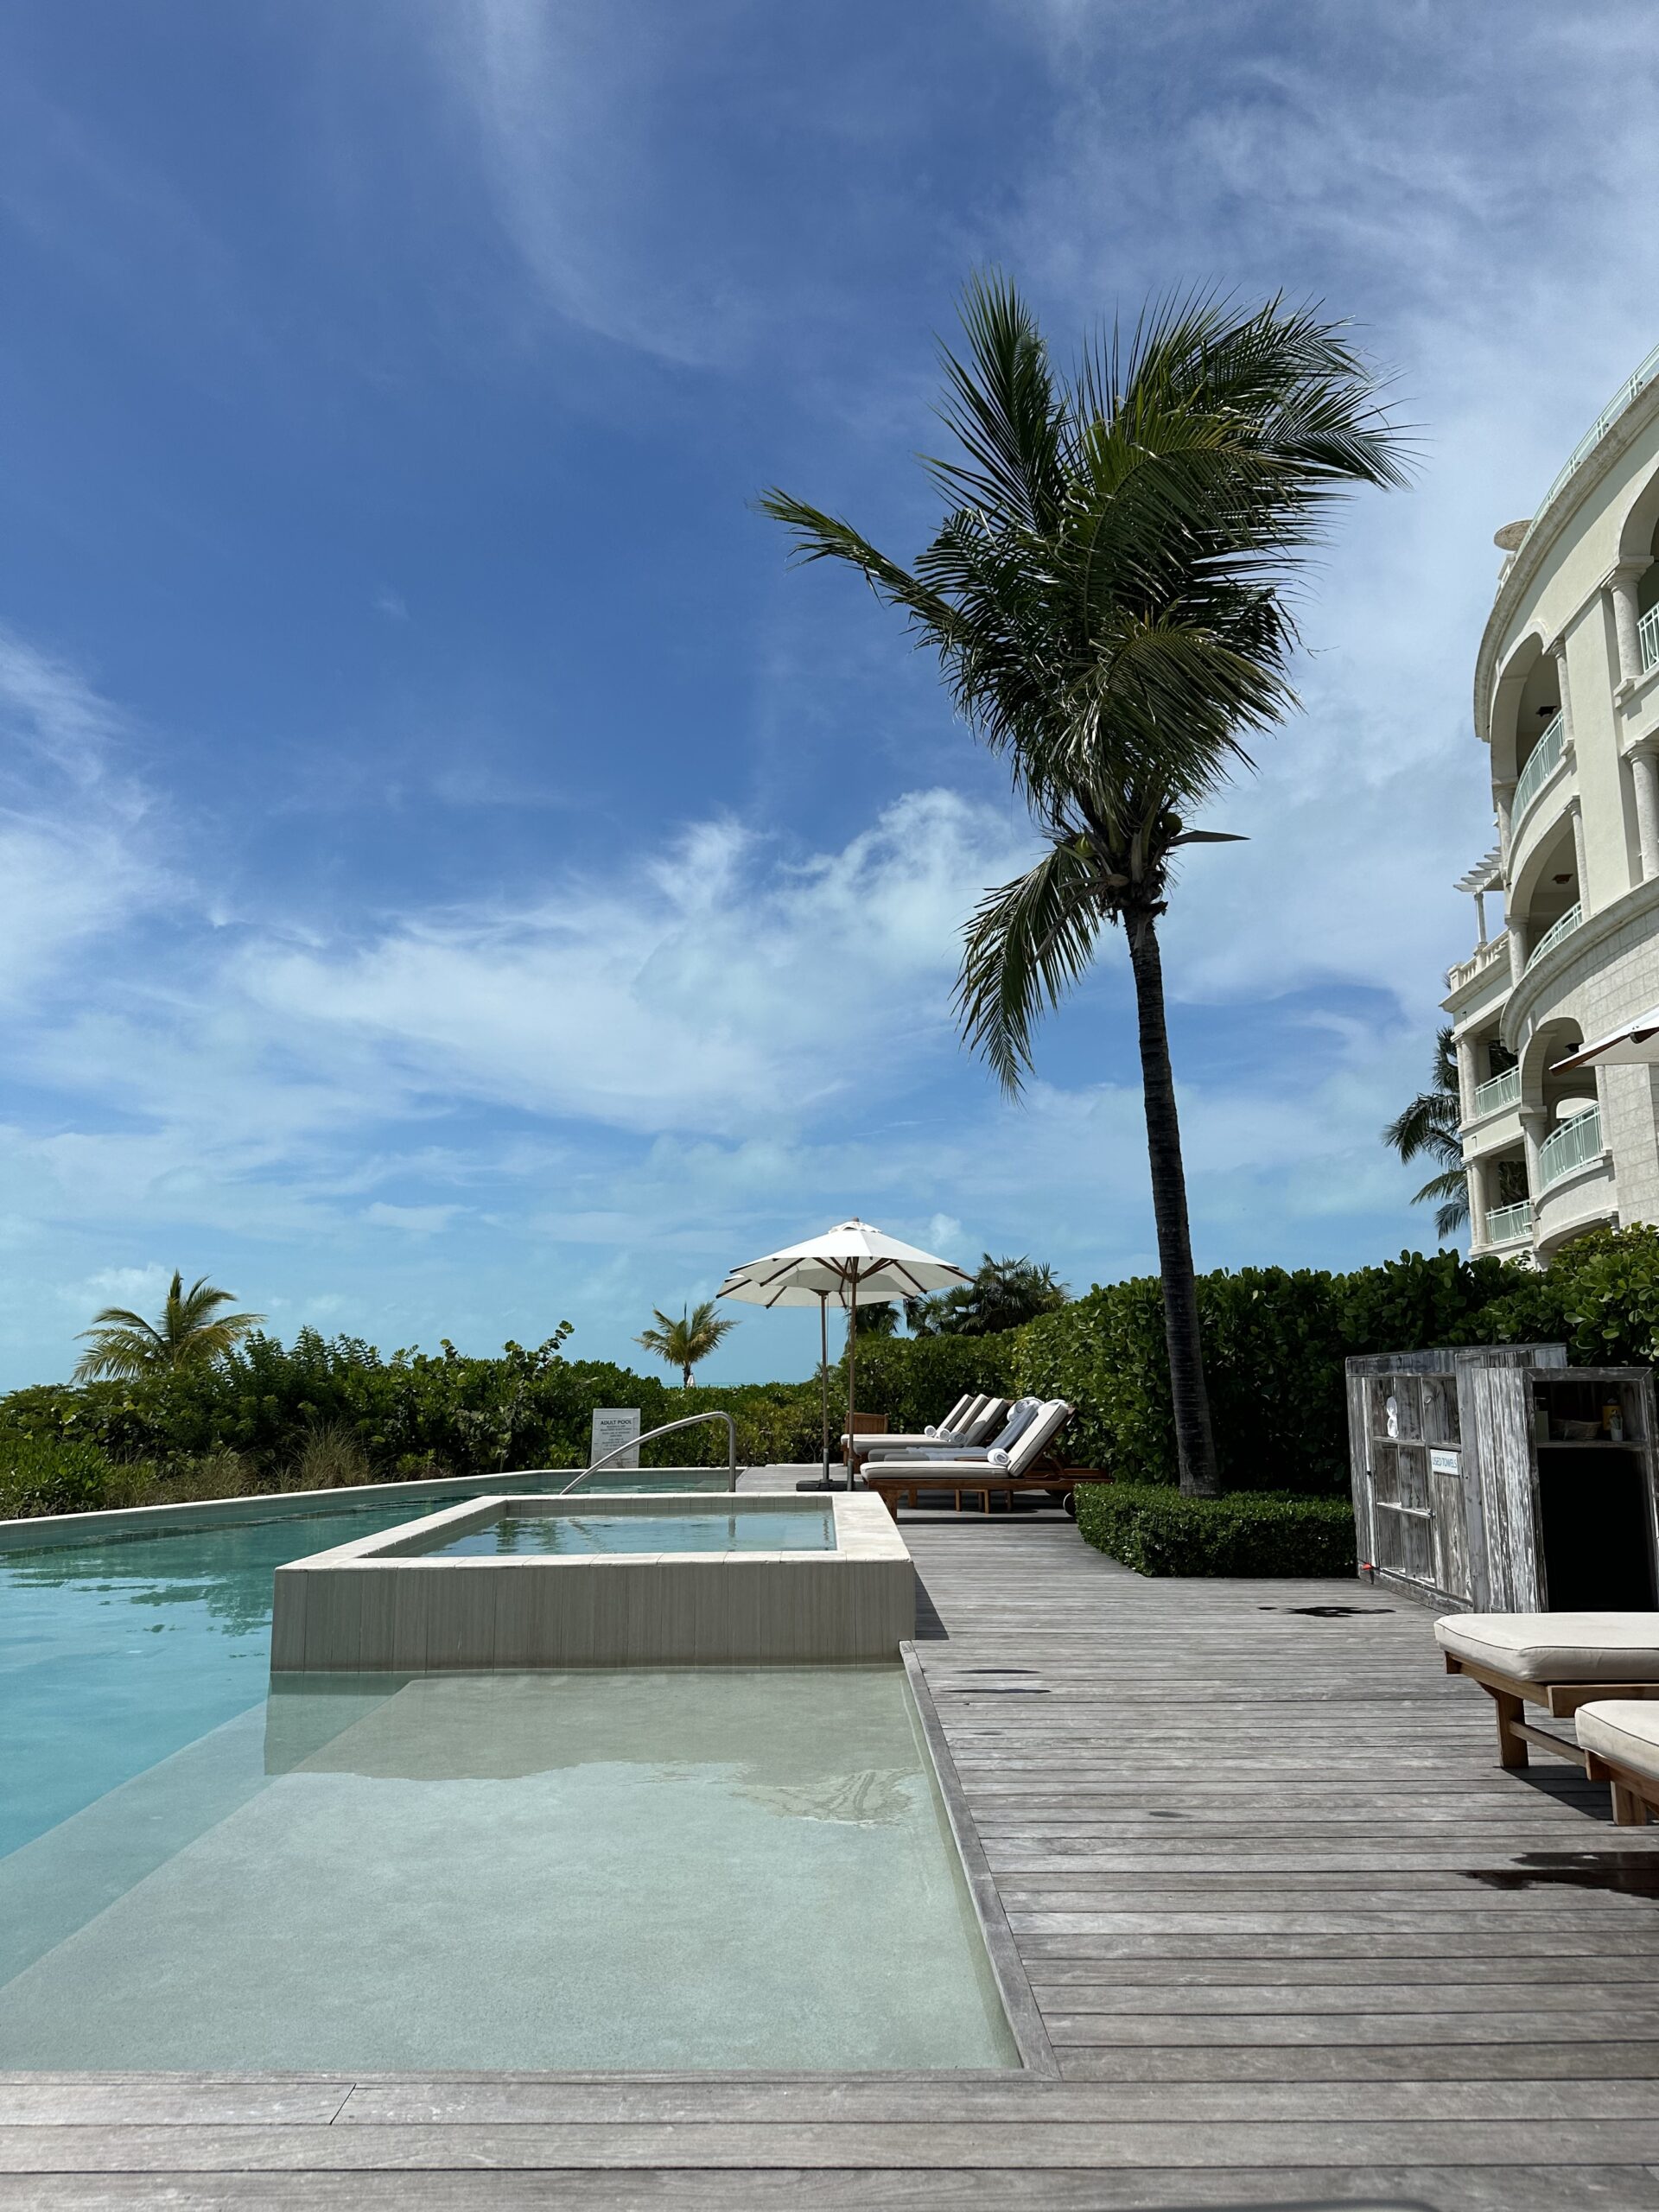 Where To Stay in Turks & Caicos: The Shore Club